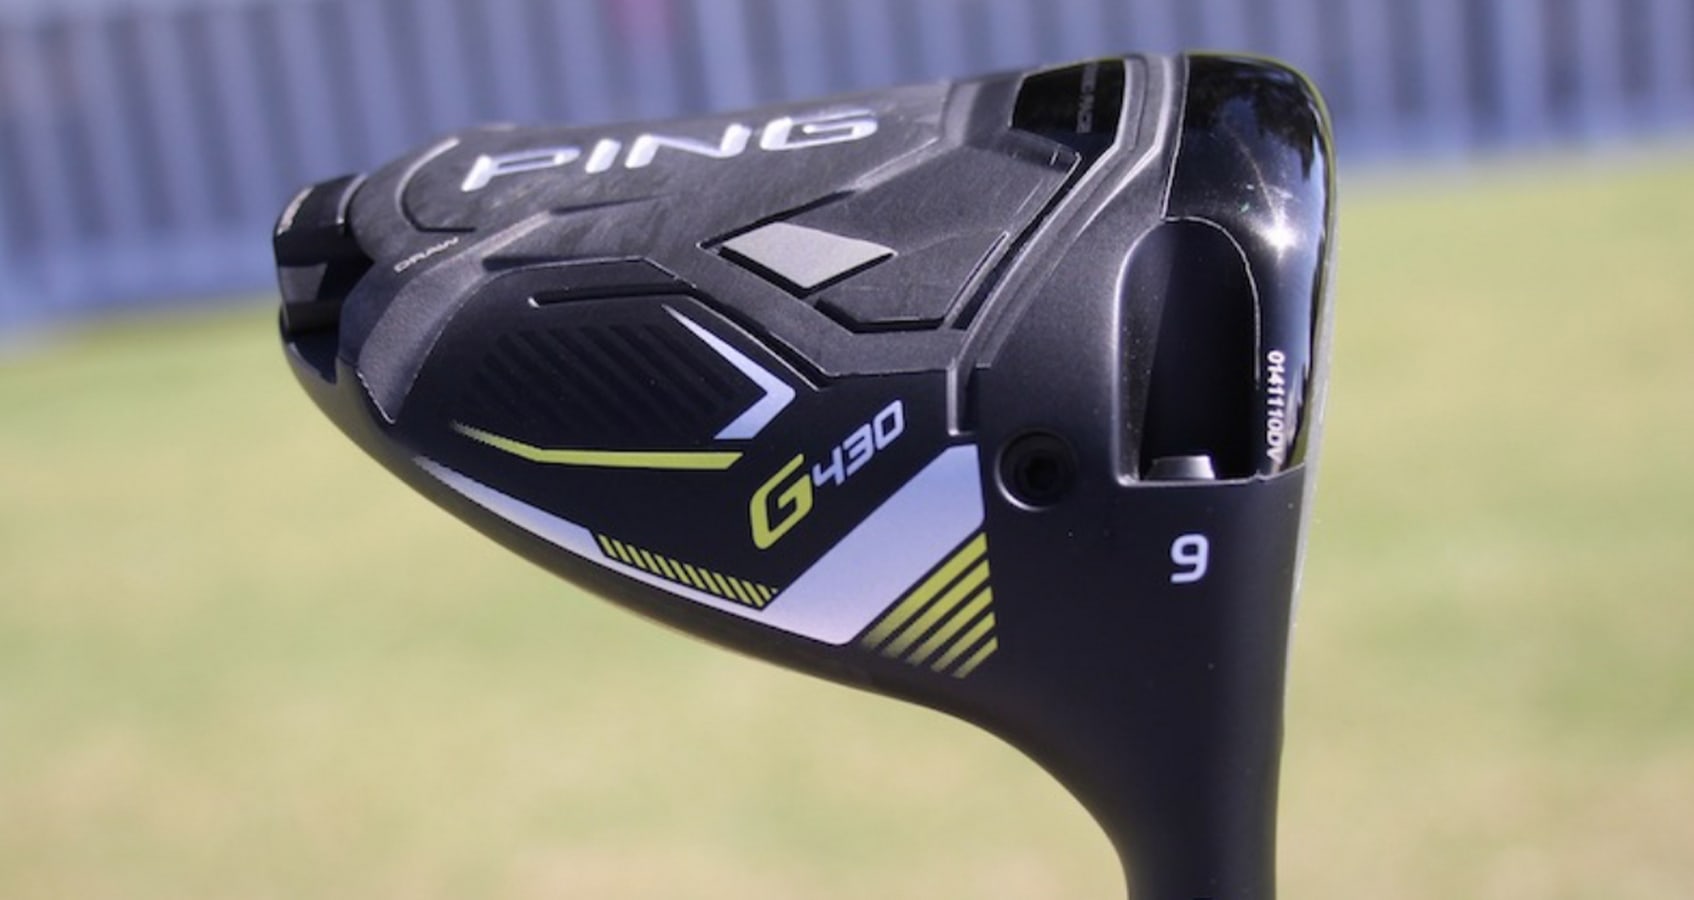 I Tried The New PING G430 Driver - GolfDom